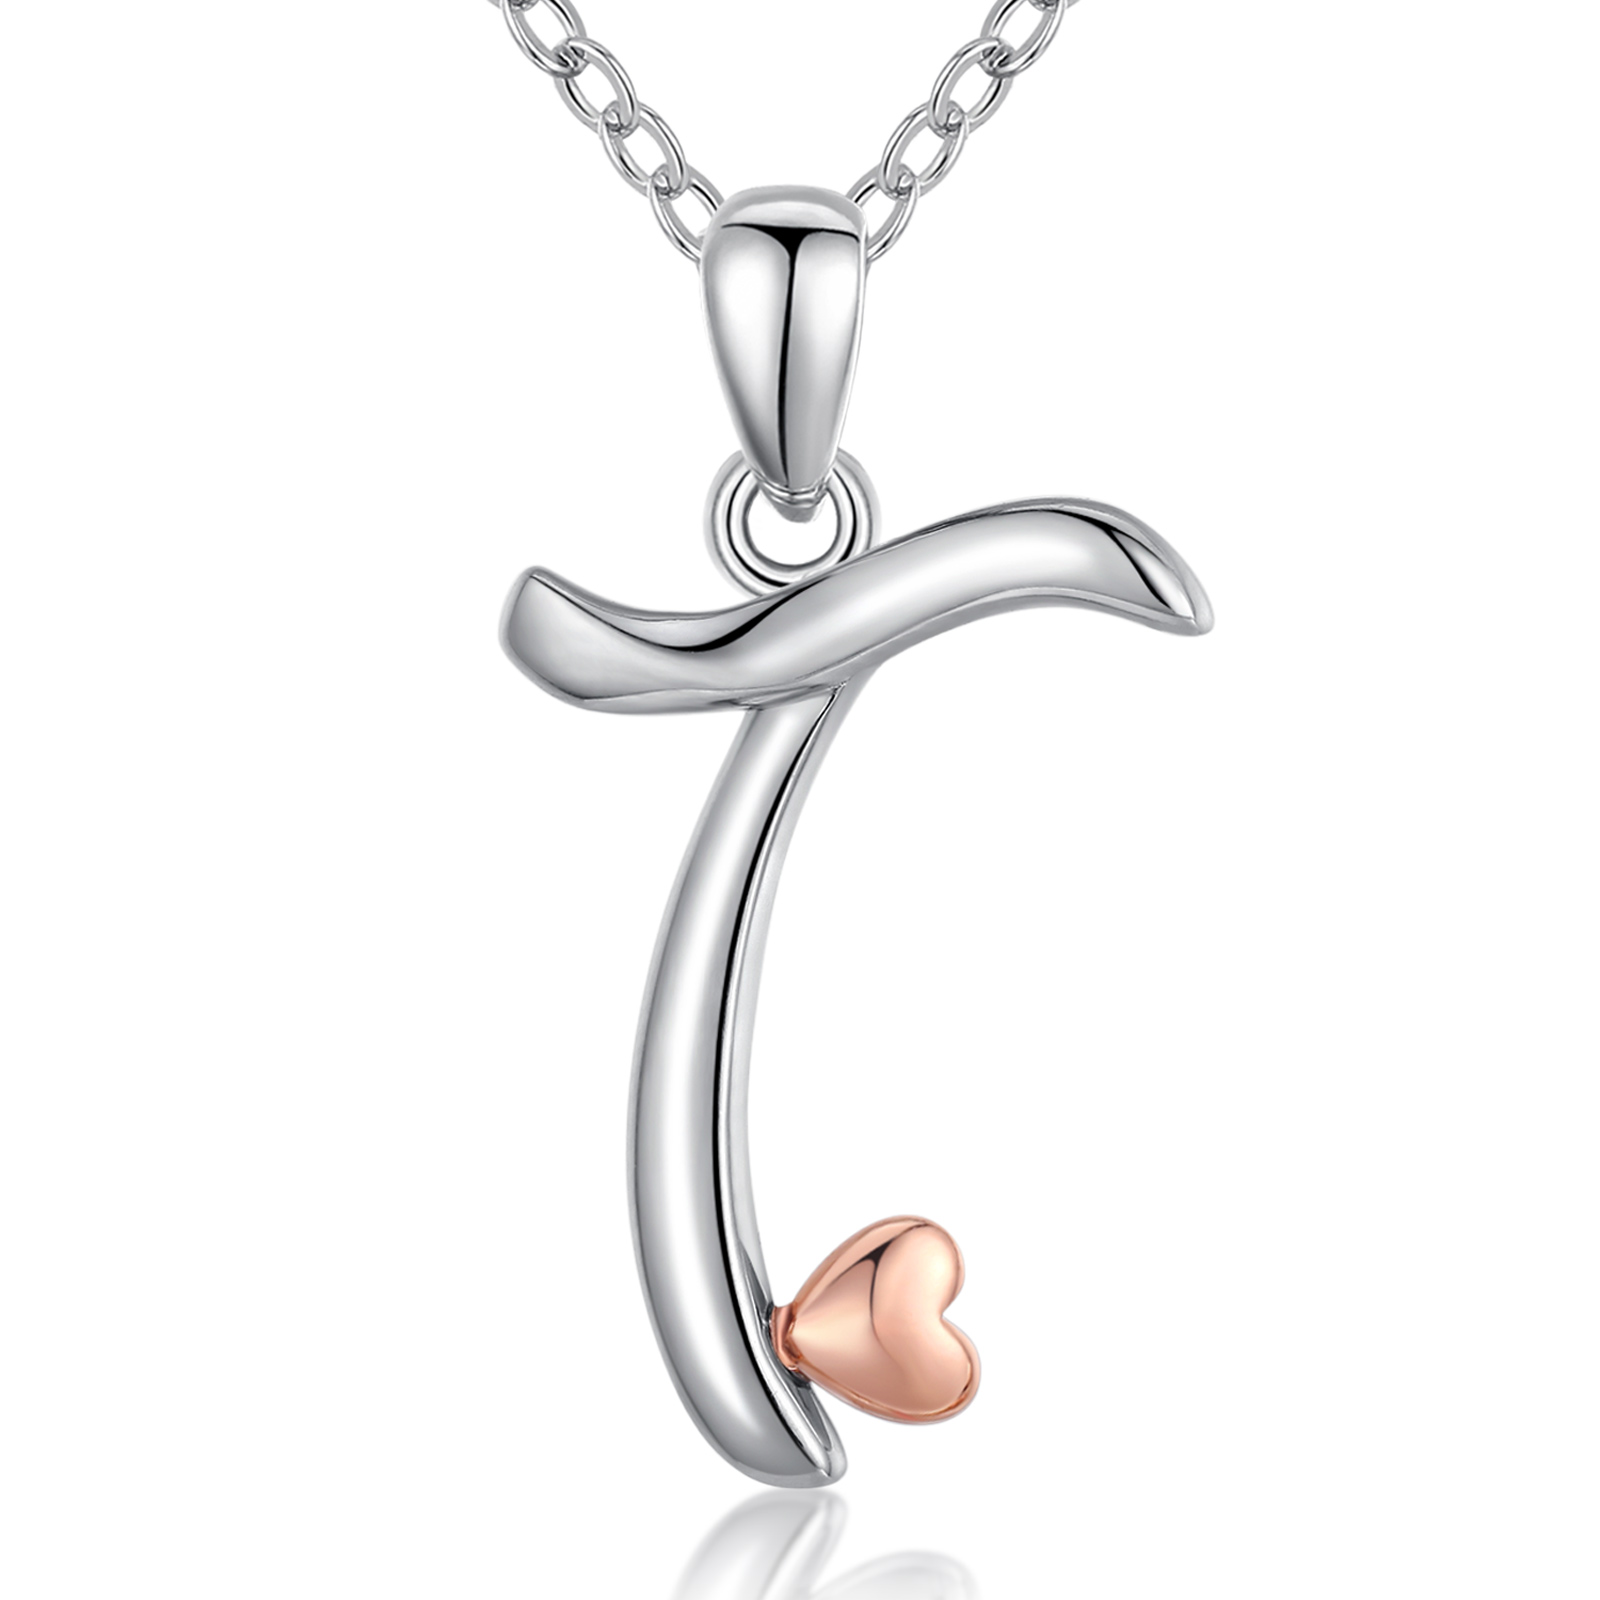 Merryshine Jewelry wholesale price s925 sterling silver plated rhodium letter T initial pendant necklace